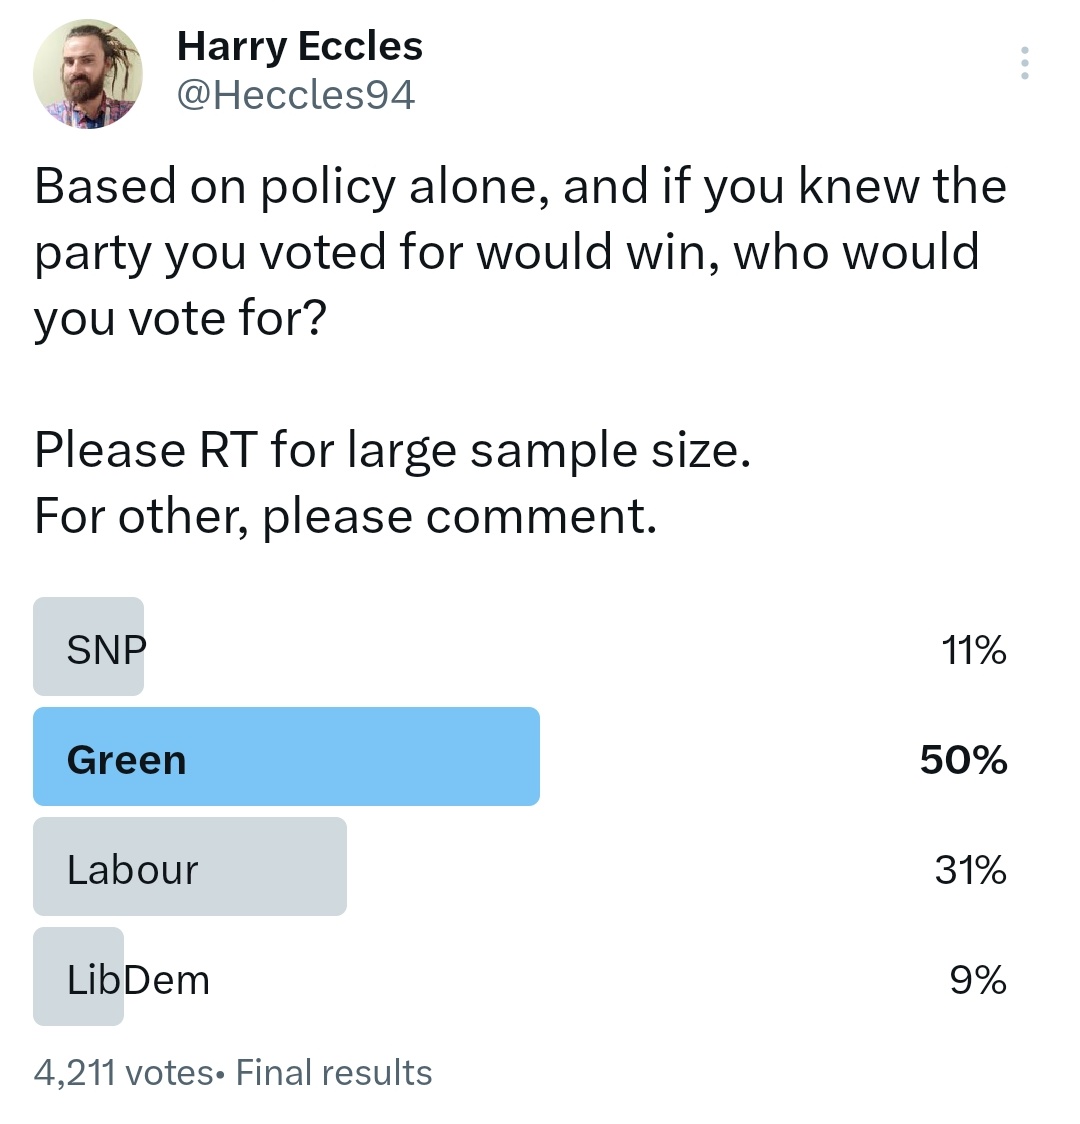 This poll has increased from 47% when last ran to 50%. 

The tide is turning, and people want better. People deserve better.

Want Green? Vote green. Tell a friend. 

#VoteGreen 💚